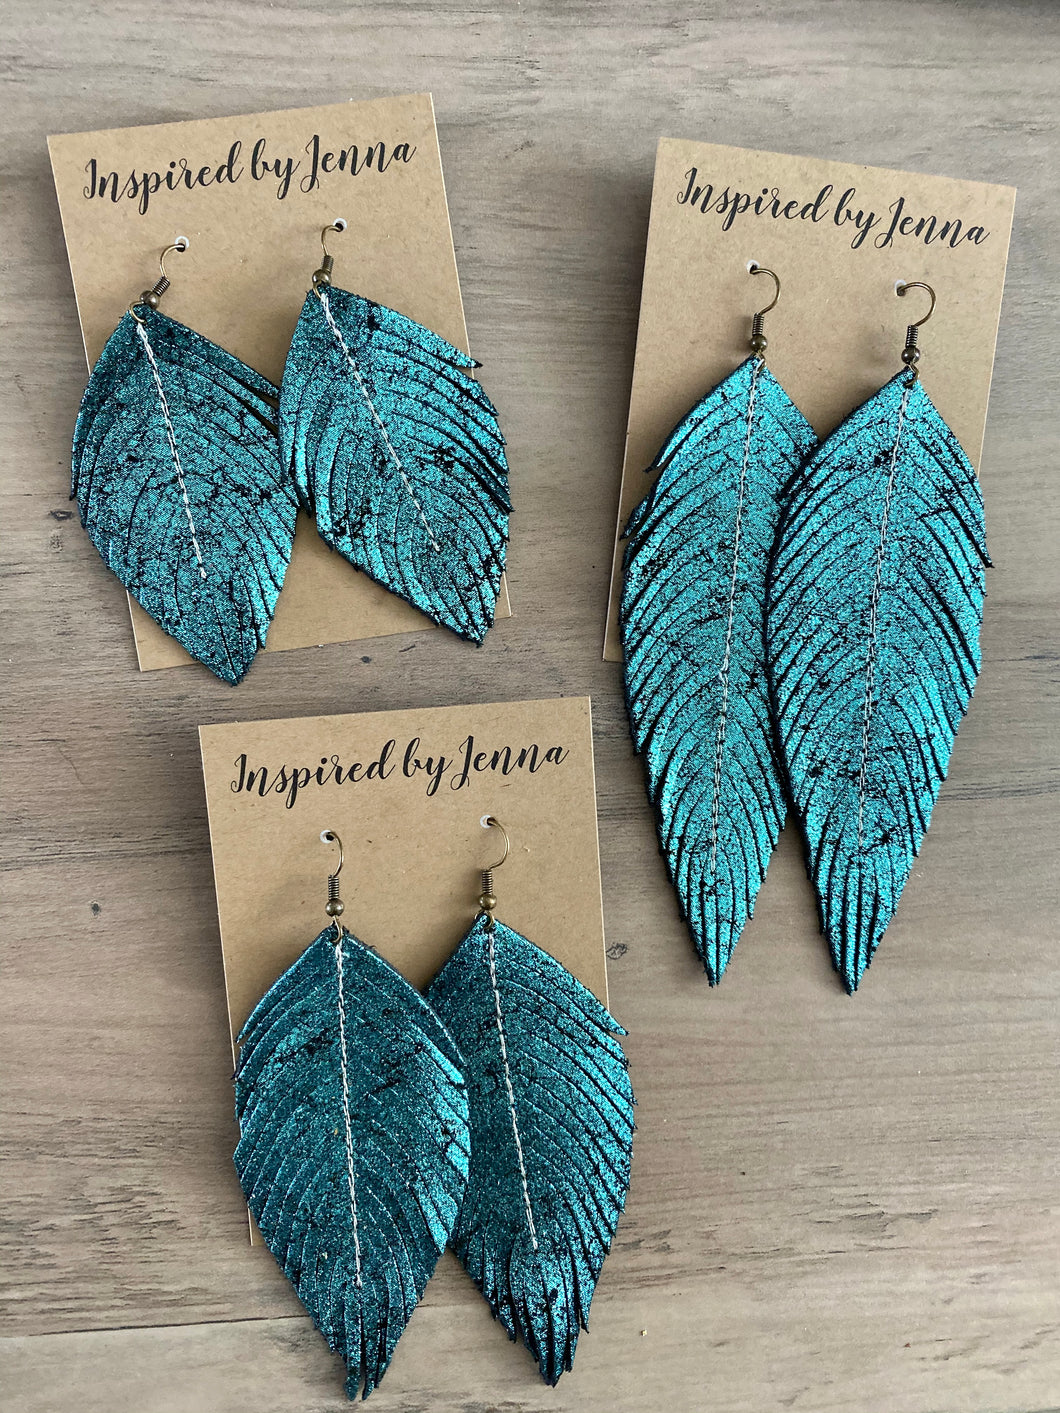 Teal Shimmer Leather Feather Earrings (4 sizes)